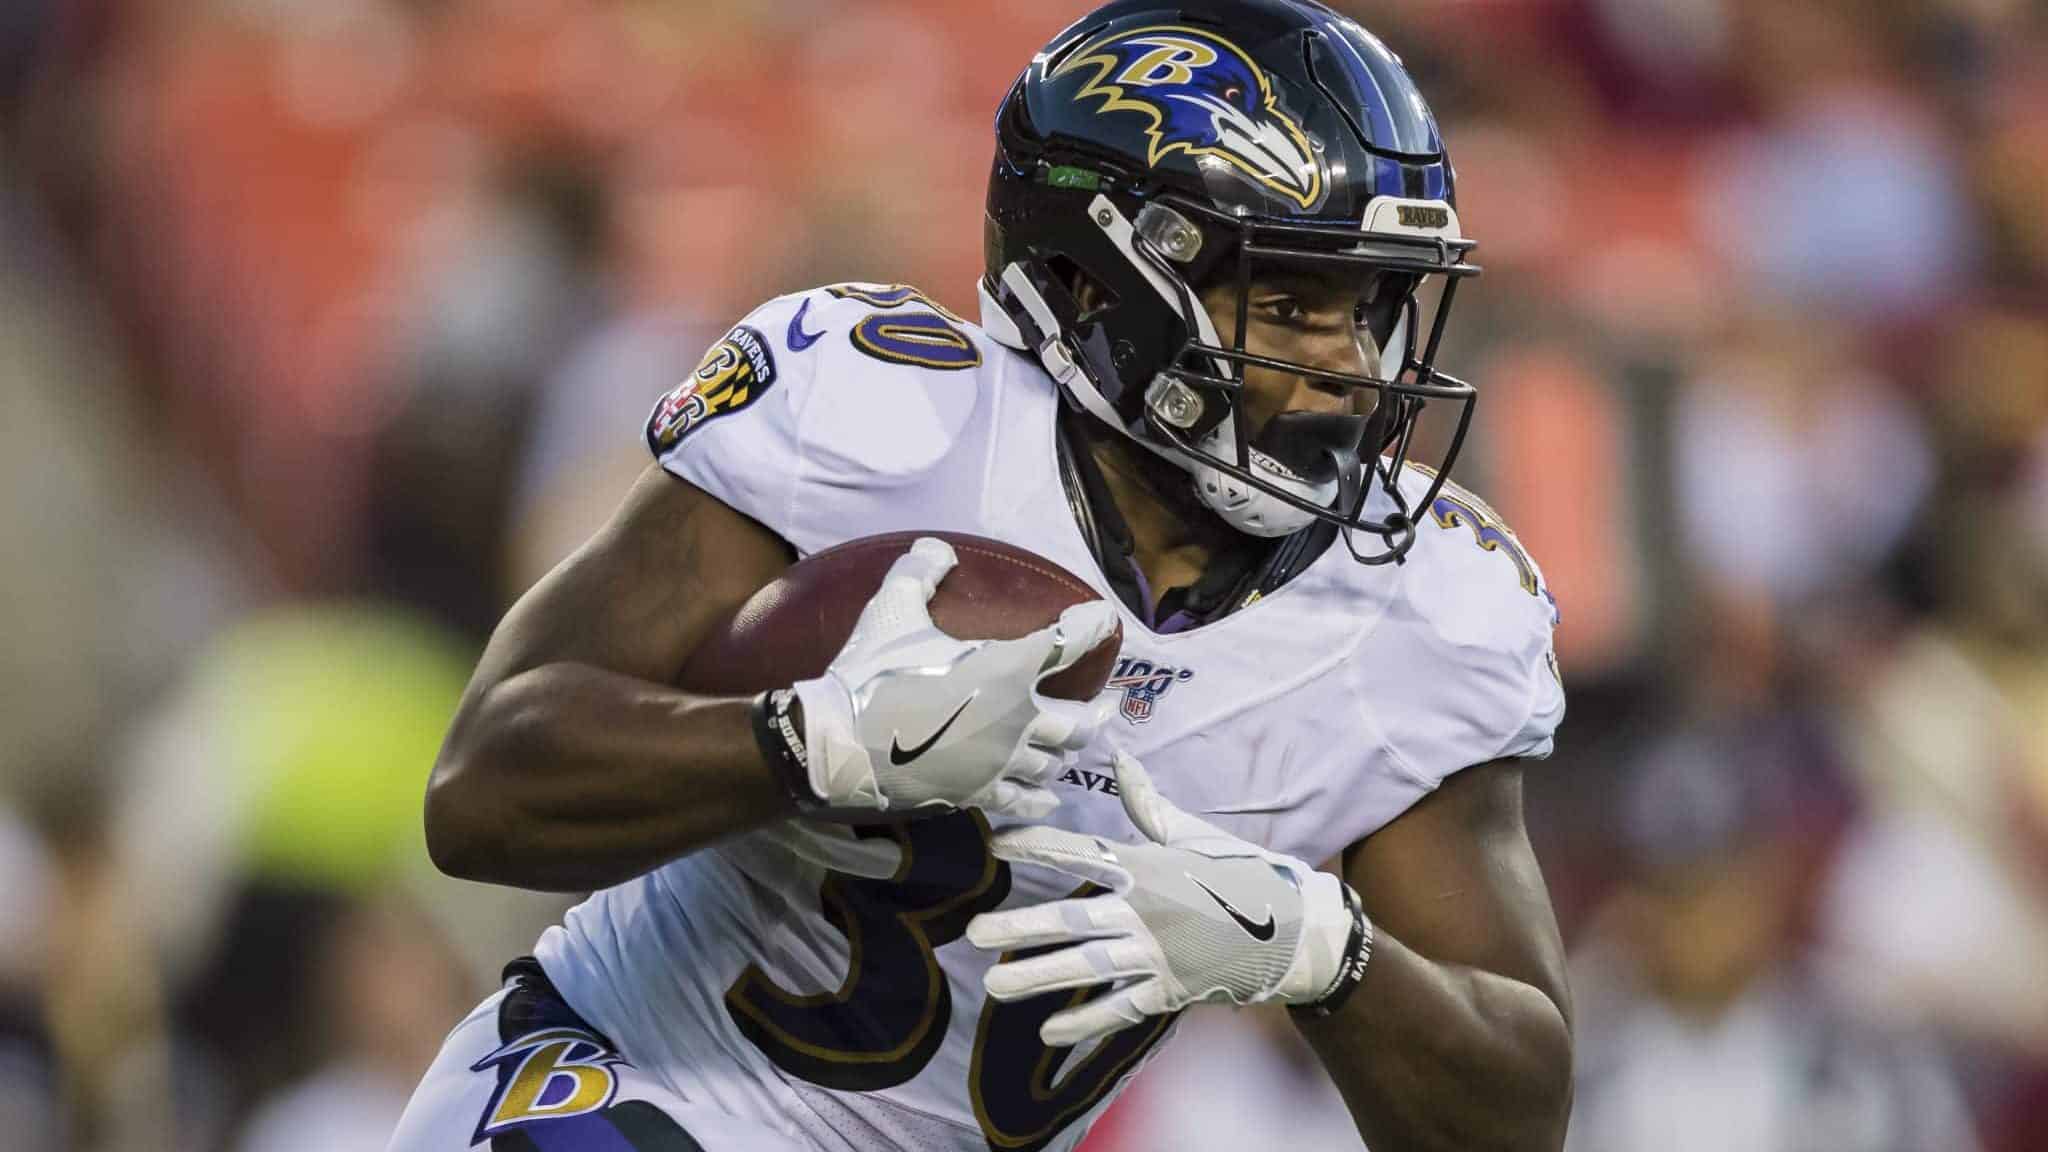 LANDOVER, MD - AUGUST 29: Kenneth Dixon #30 of the Baltimore Ravens carries the ball during the first half of a preseason game against the Washington Redskins at FedExField on August 29, 2019 in Landover, Maryland.